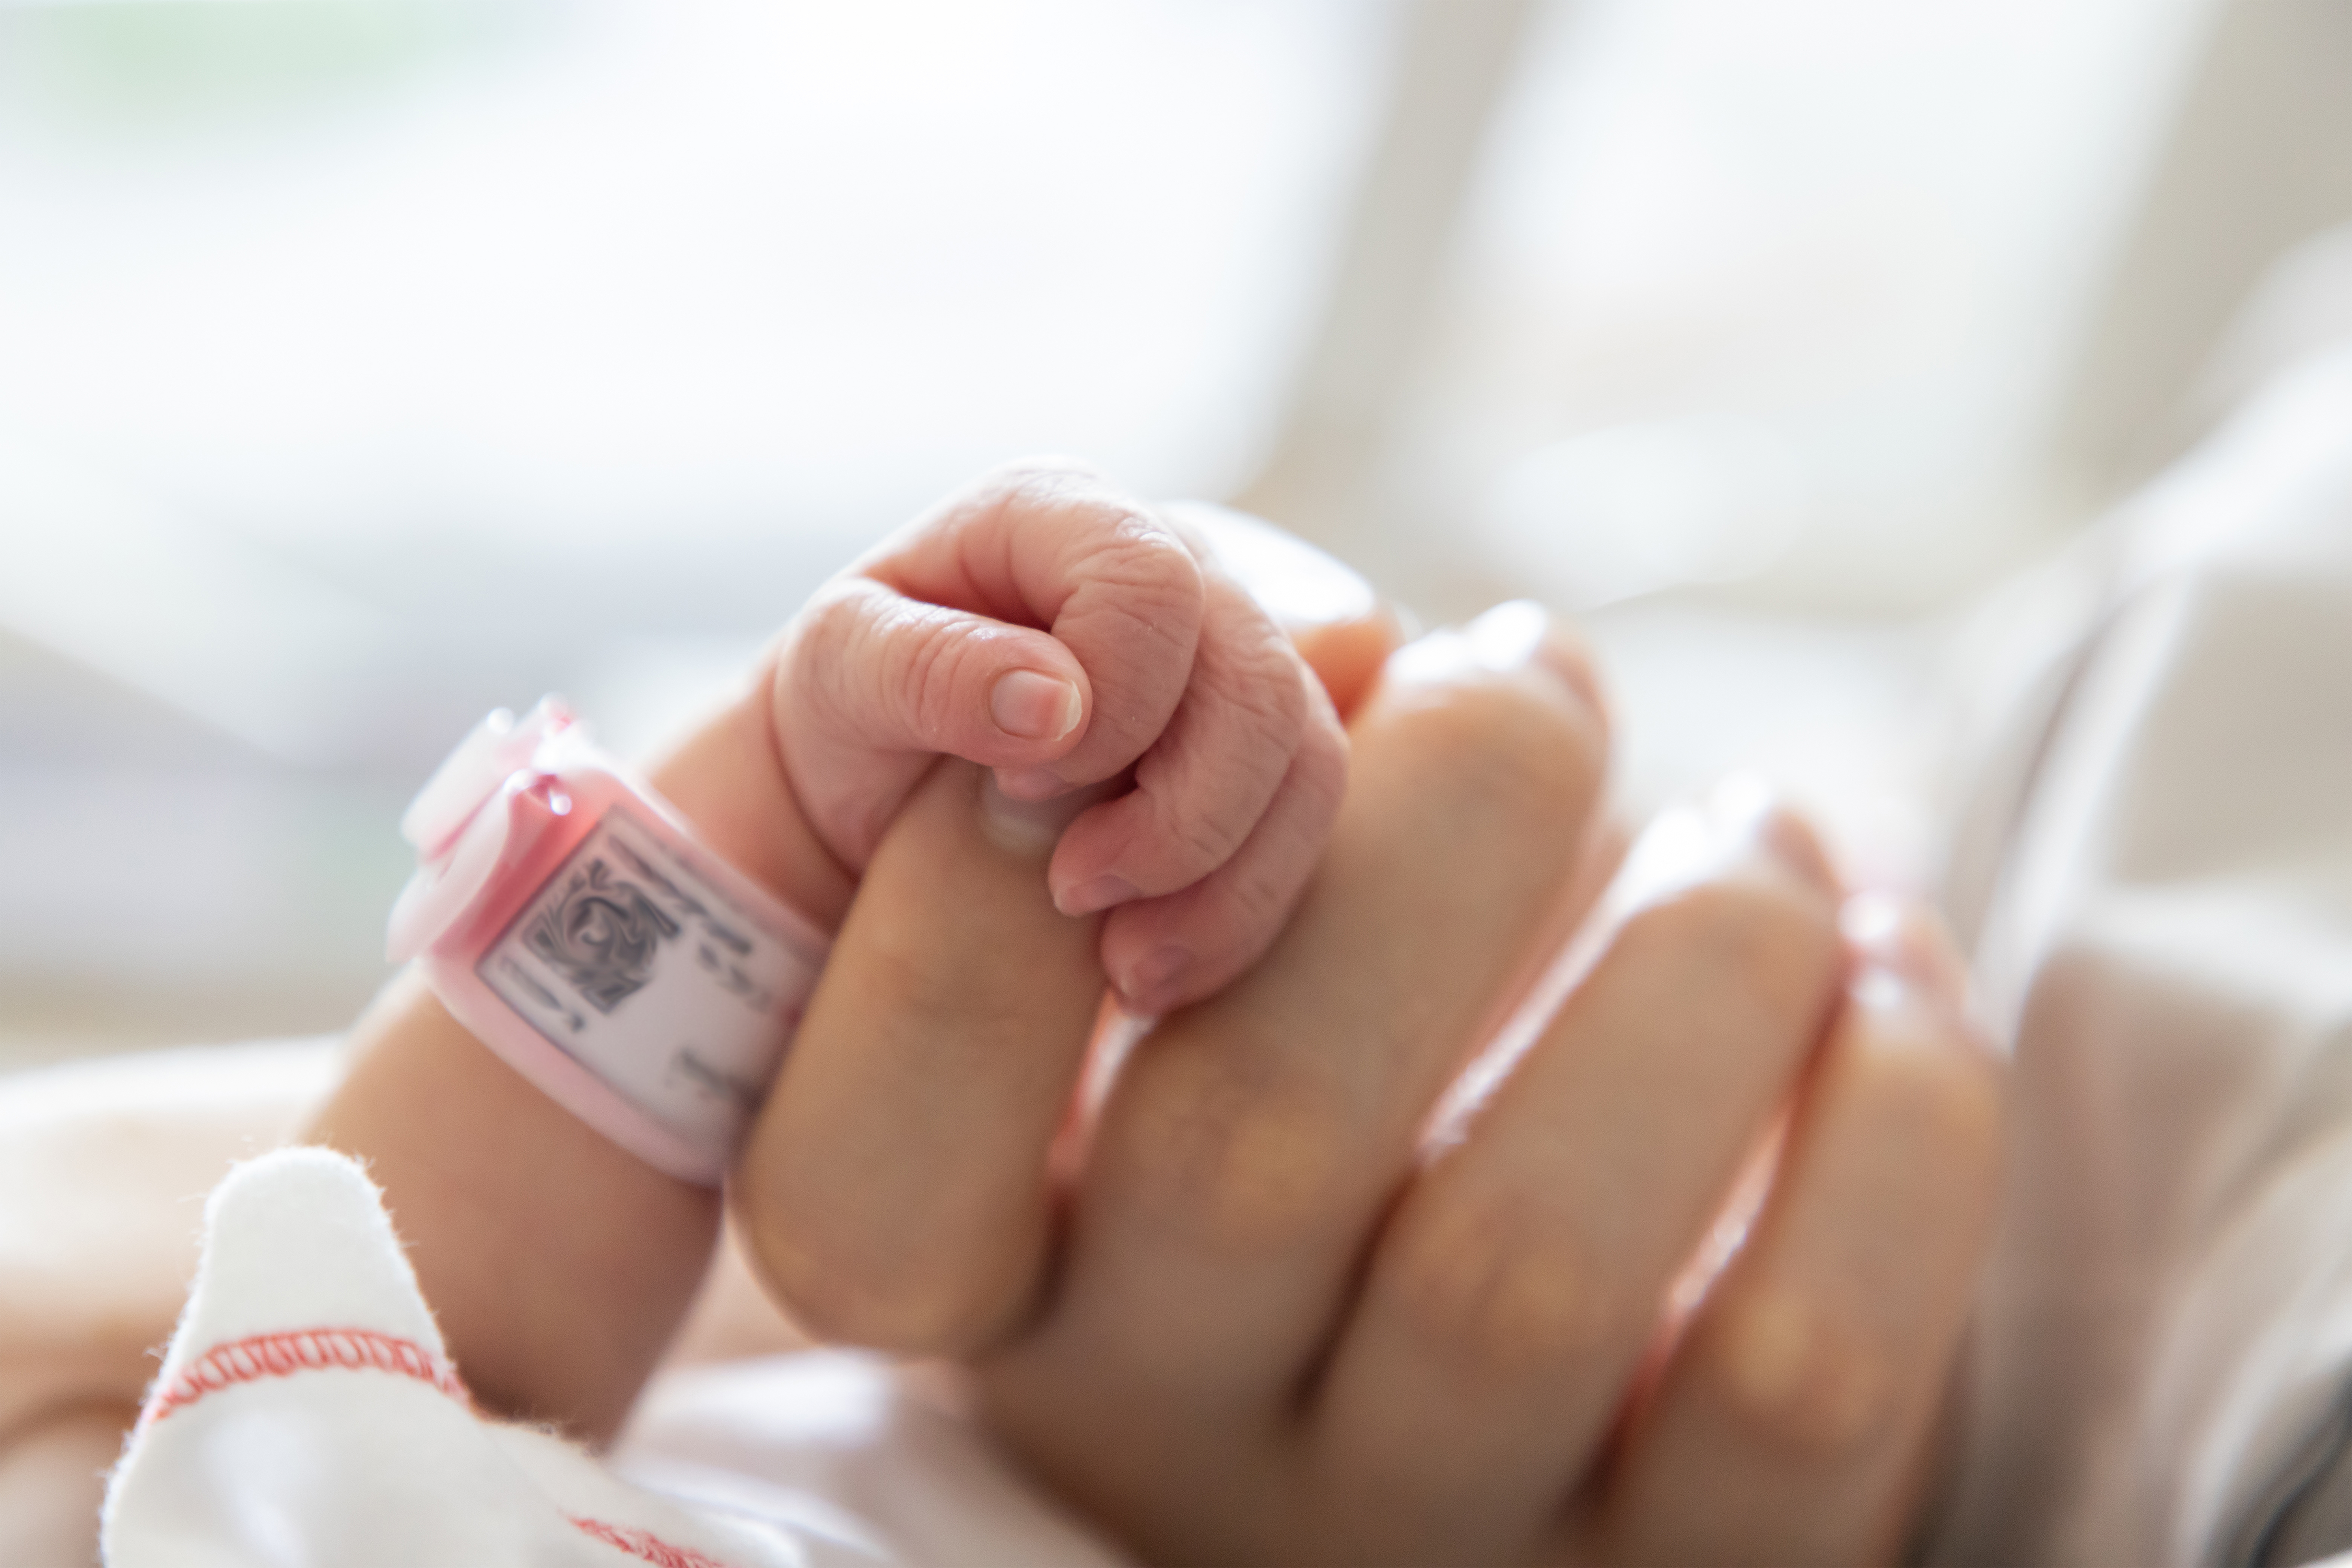 A newborn baby's hand holding it's mother's fingers | Source: Shutterstock